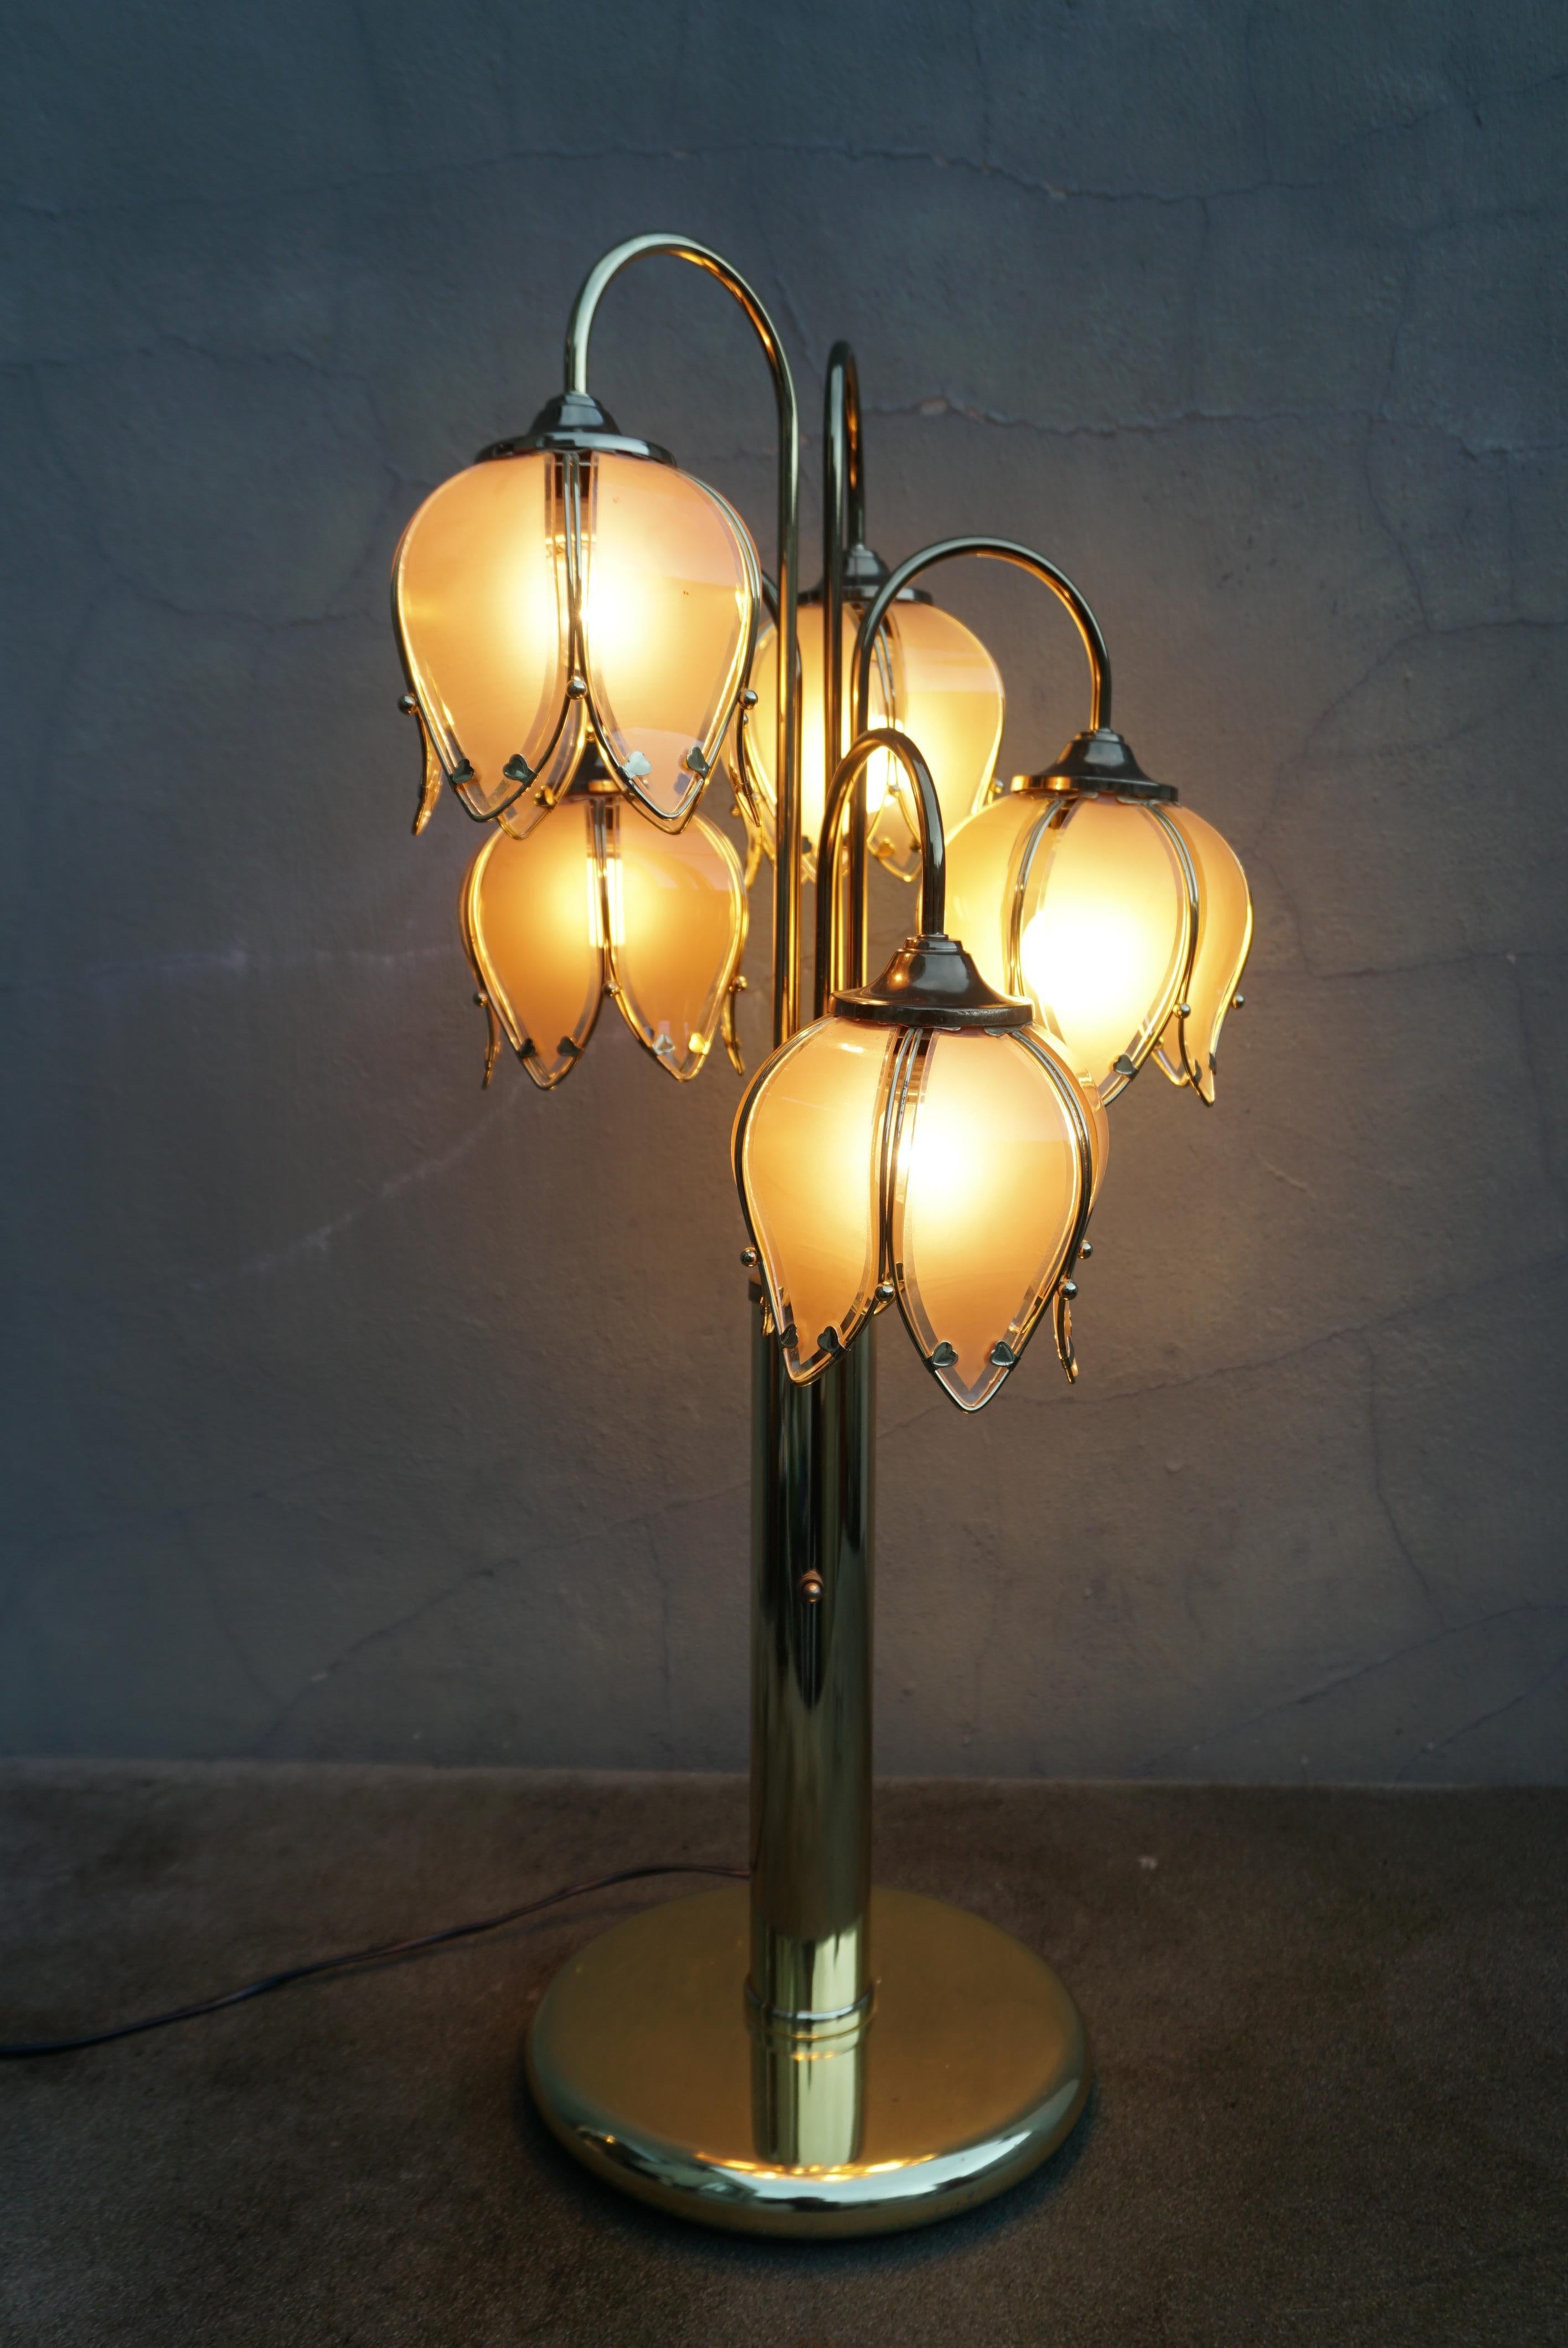 Hollywood Regency Mid-Century Modern Glass and Brass 5 Arm Lotus Lamp 1970s For Sale